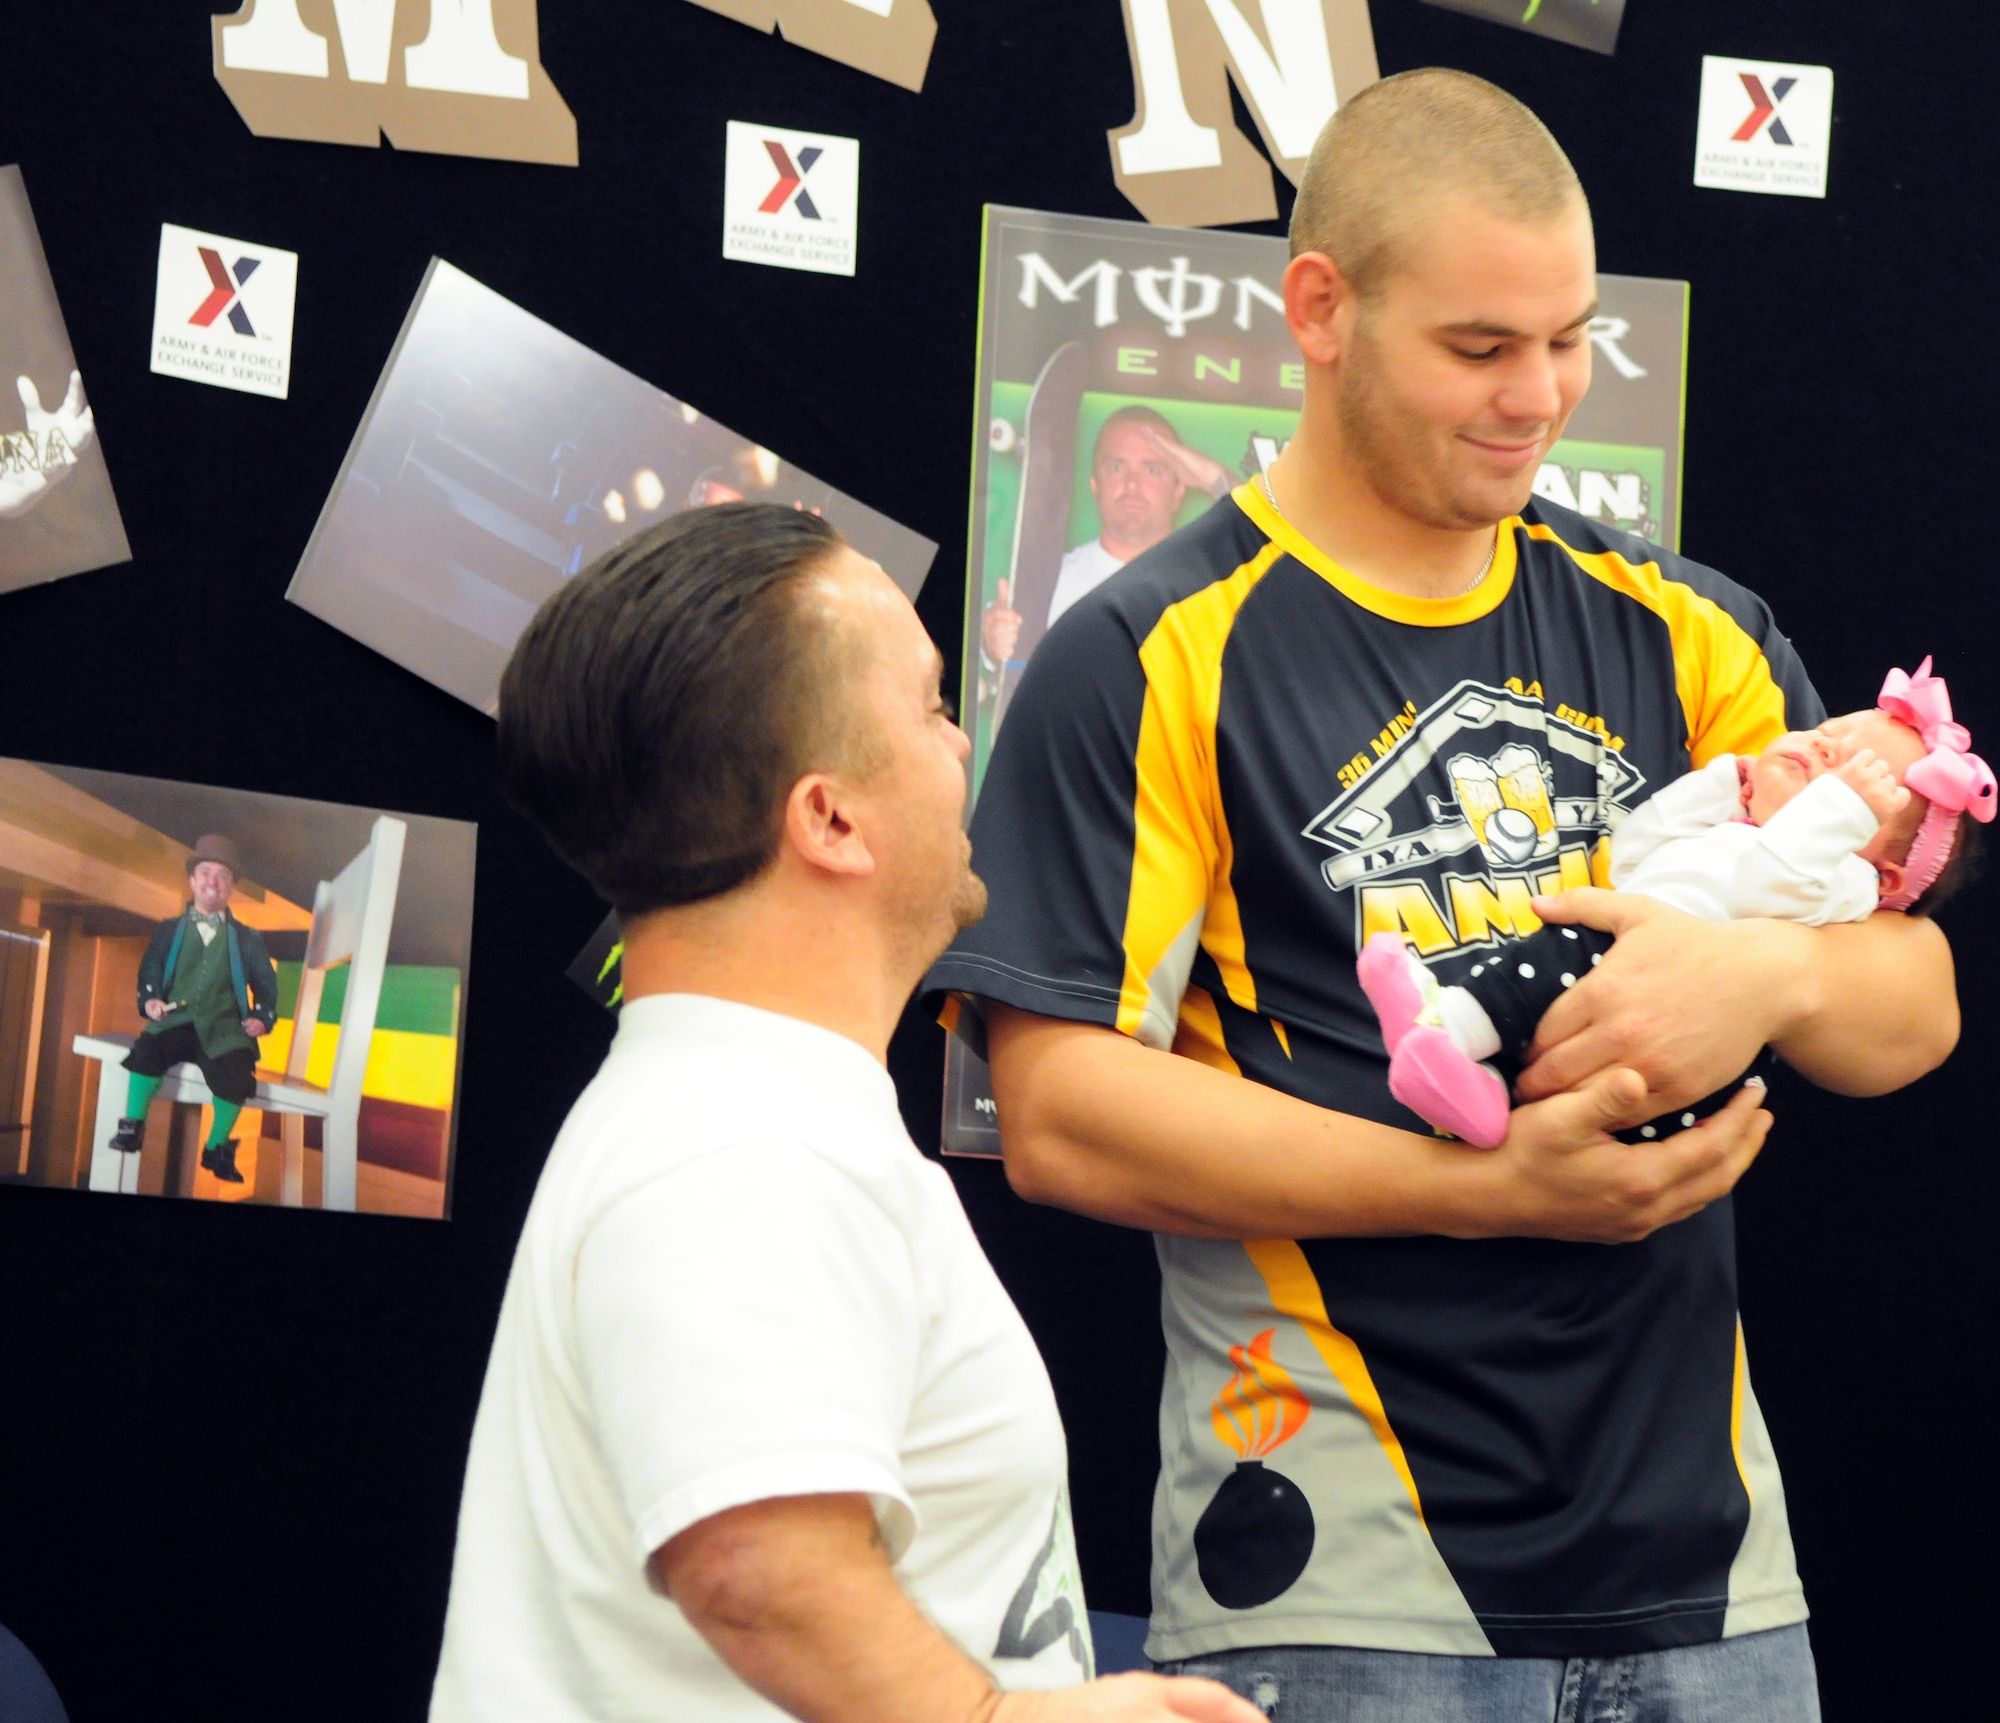 Actor Jason “Wee Man” Acuña greets Senior Airman Cody Allen, 36th Munitions Squadron, and his three-week old daughter, Callea, at the Base Exchange on Andersen Air Force Base, Guam, Jan. 9. Wee Man Signed autographs, raffled prizes, conducted a skateboard demonstration and previewed his newest movie for Airmen and family members at Andersen as part of his Wee Man Salutes the Service tour. (U.S. Air Force photo by Senior Airman Robert Hicks/Released)